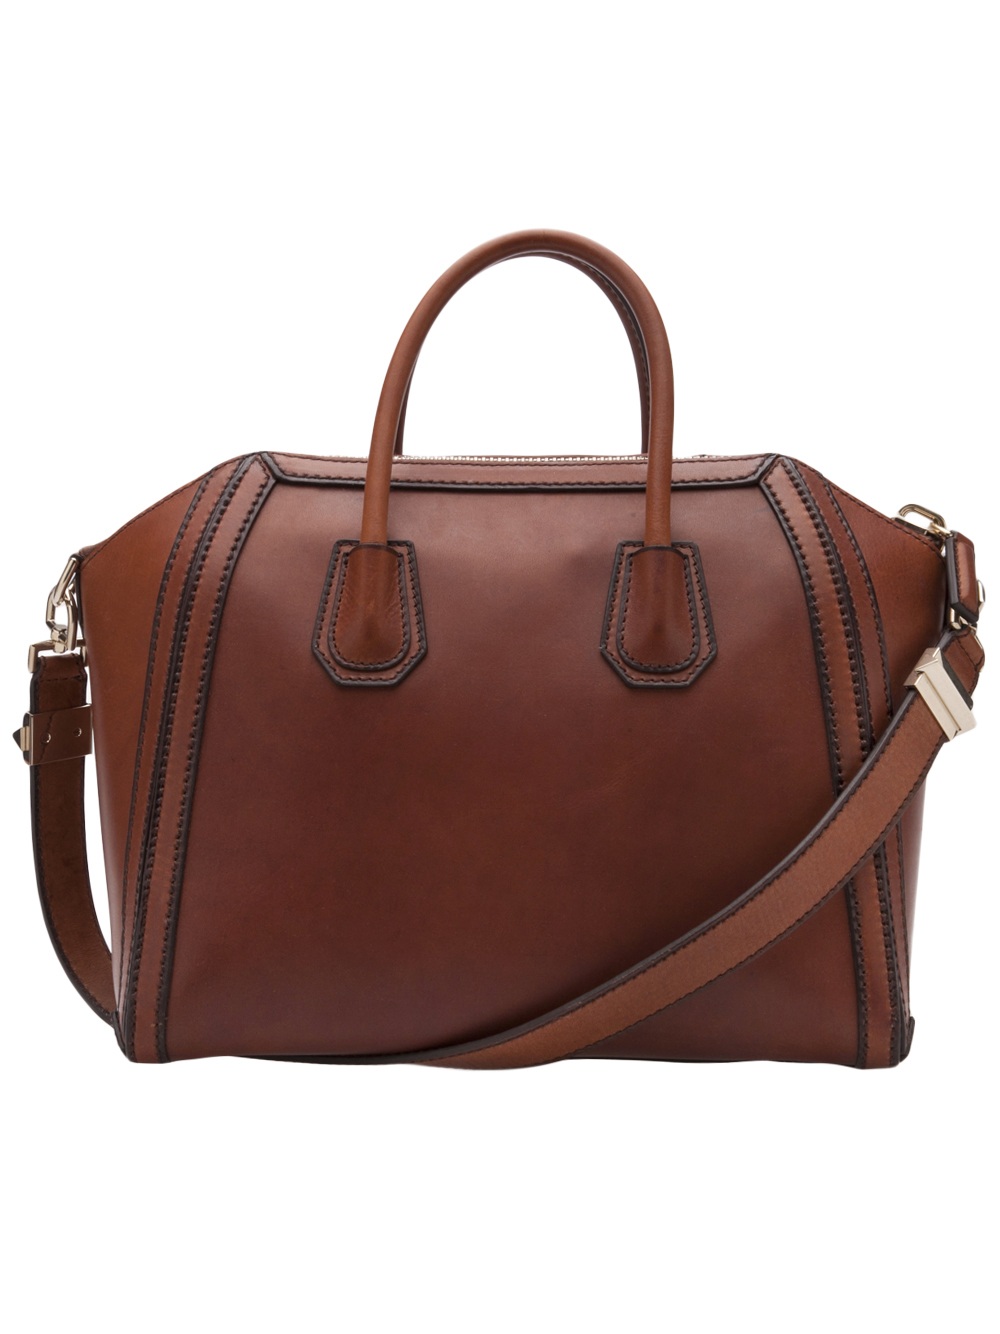 Givenchy Tote Bag in Brown | Lyst